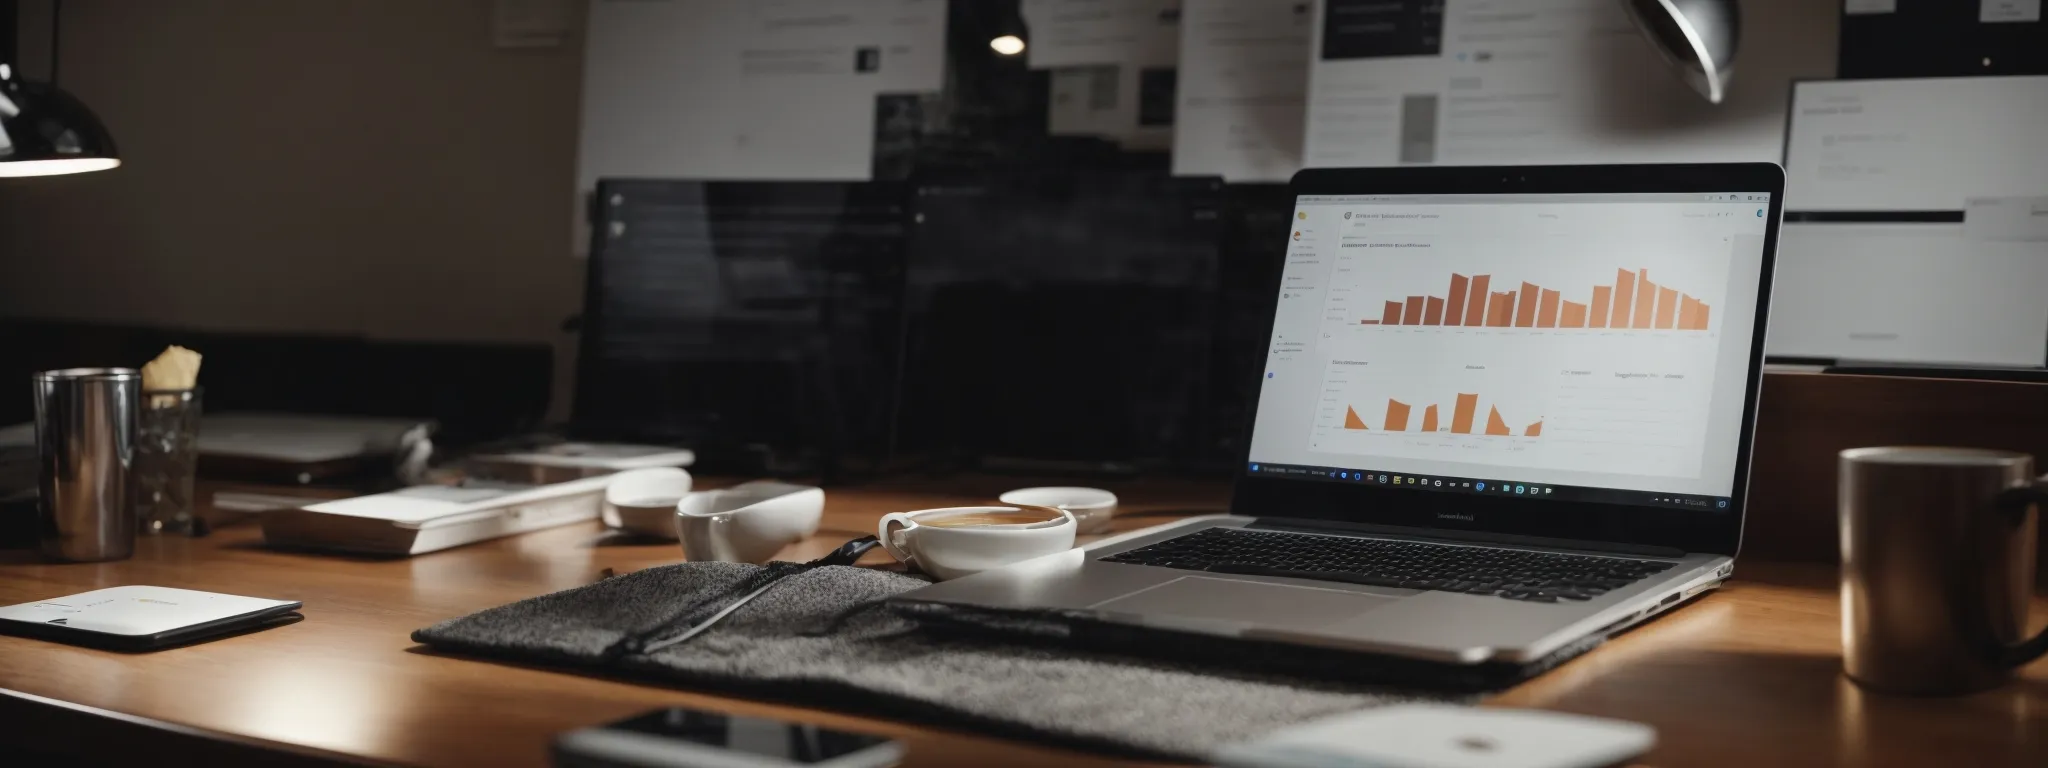 a laptop displaying graphs and analytics on a desk with a notepad and coffee cup beside it.